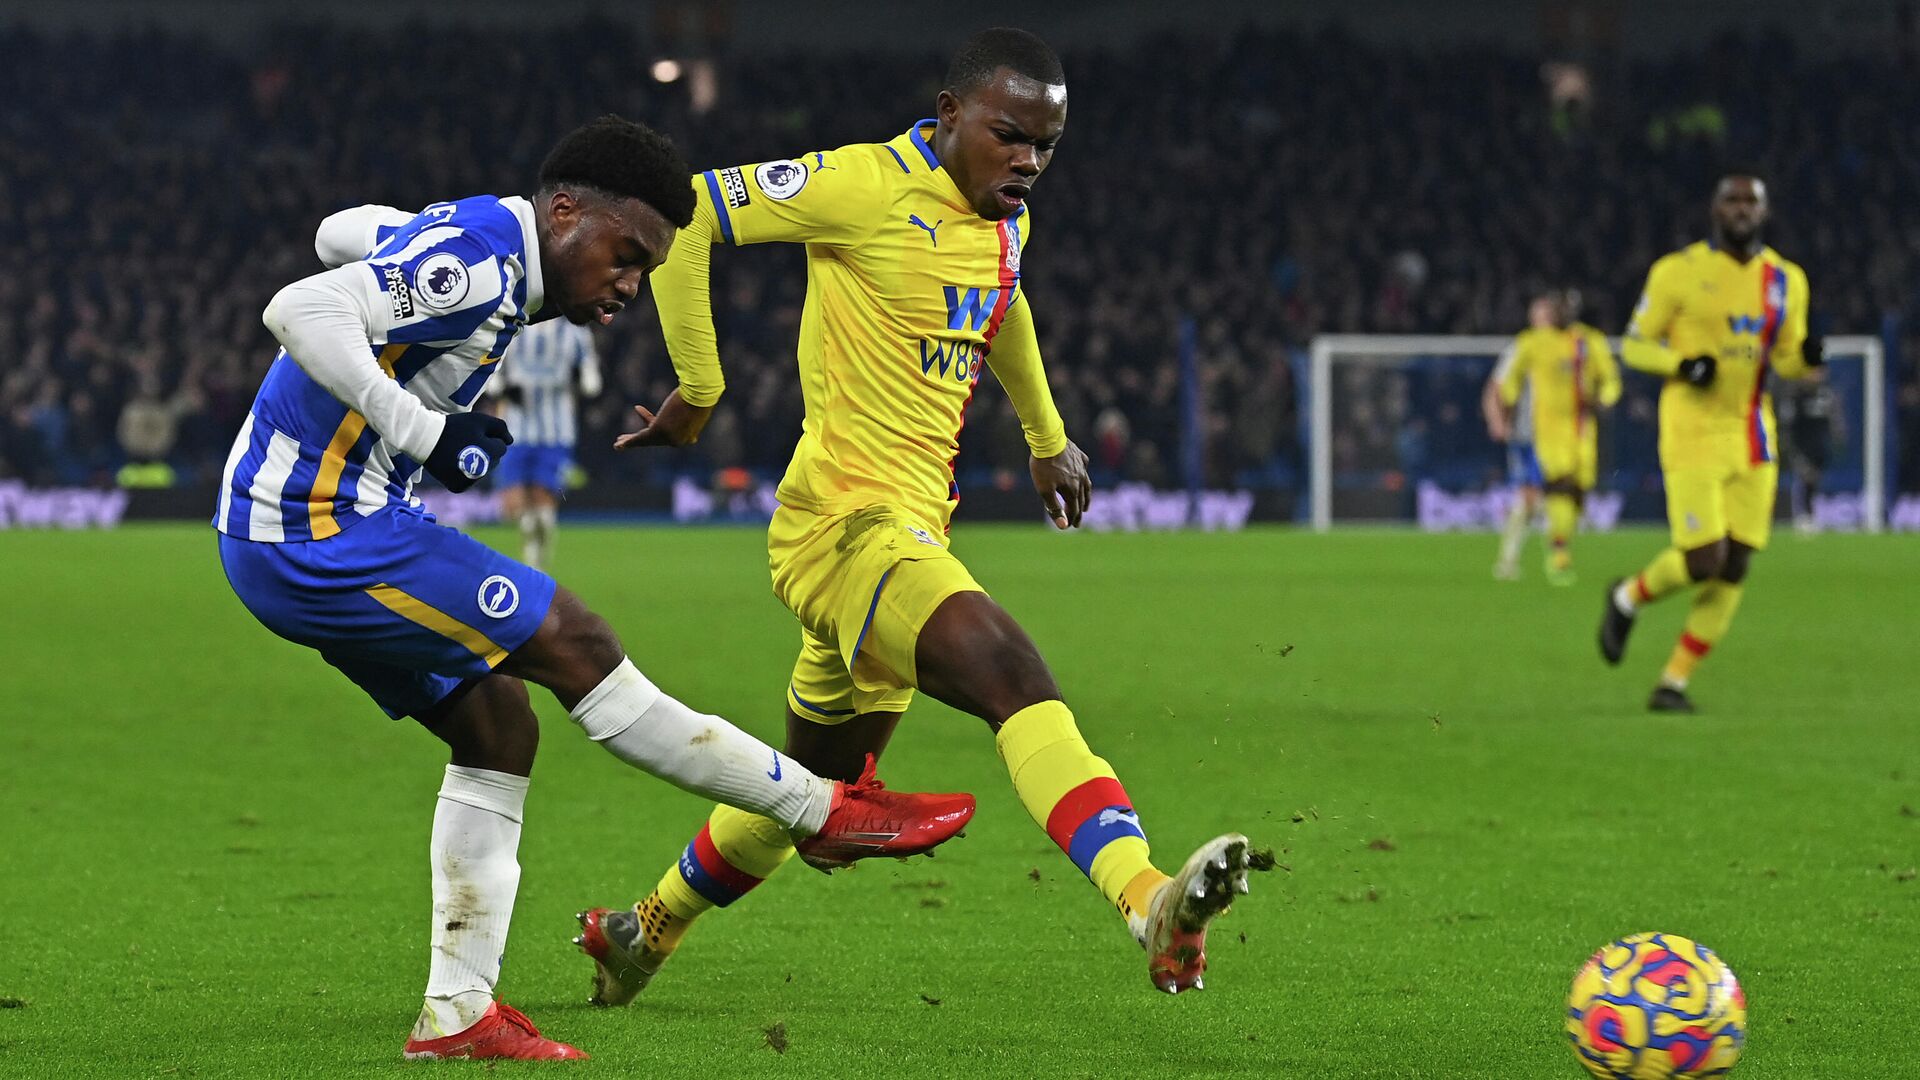 Brighton's English midfielder Tariq Lamptey (L) crosses the ball in front of Crystal Palace's English defender Tyrick Mitchell (C) during the English Premier League football match between Brighton and Hove Albion and Crystal Palace at the American Express Community Stadium in Brighton, southern England on January 14, 2022. - The game ended 1-1. (Photo by Glyn KIRK / AFP) / RESTRICTED TO EDITORIAL USE. No use with unauthorized audio, video, data, fixture lists, club/league logos or 'live' services. Online in-match use limited to 120 images. An additional 40 images may be used in extra time. No video emulation. Social media in-match use limited to 120 images. An additional 40 images may be used in extra time. No use in betting publications, games or single club/league/player publications. /  - РИА Новости, 1920, 15.01.2022